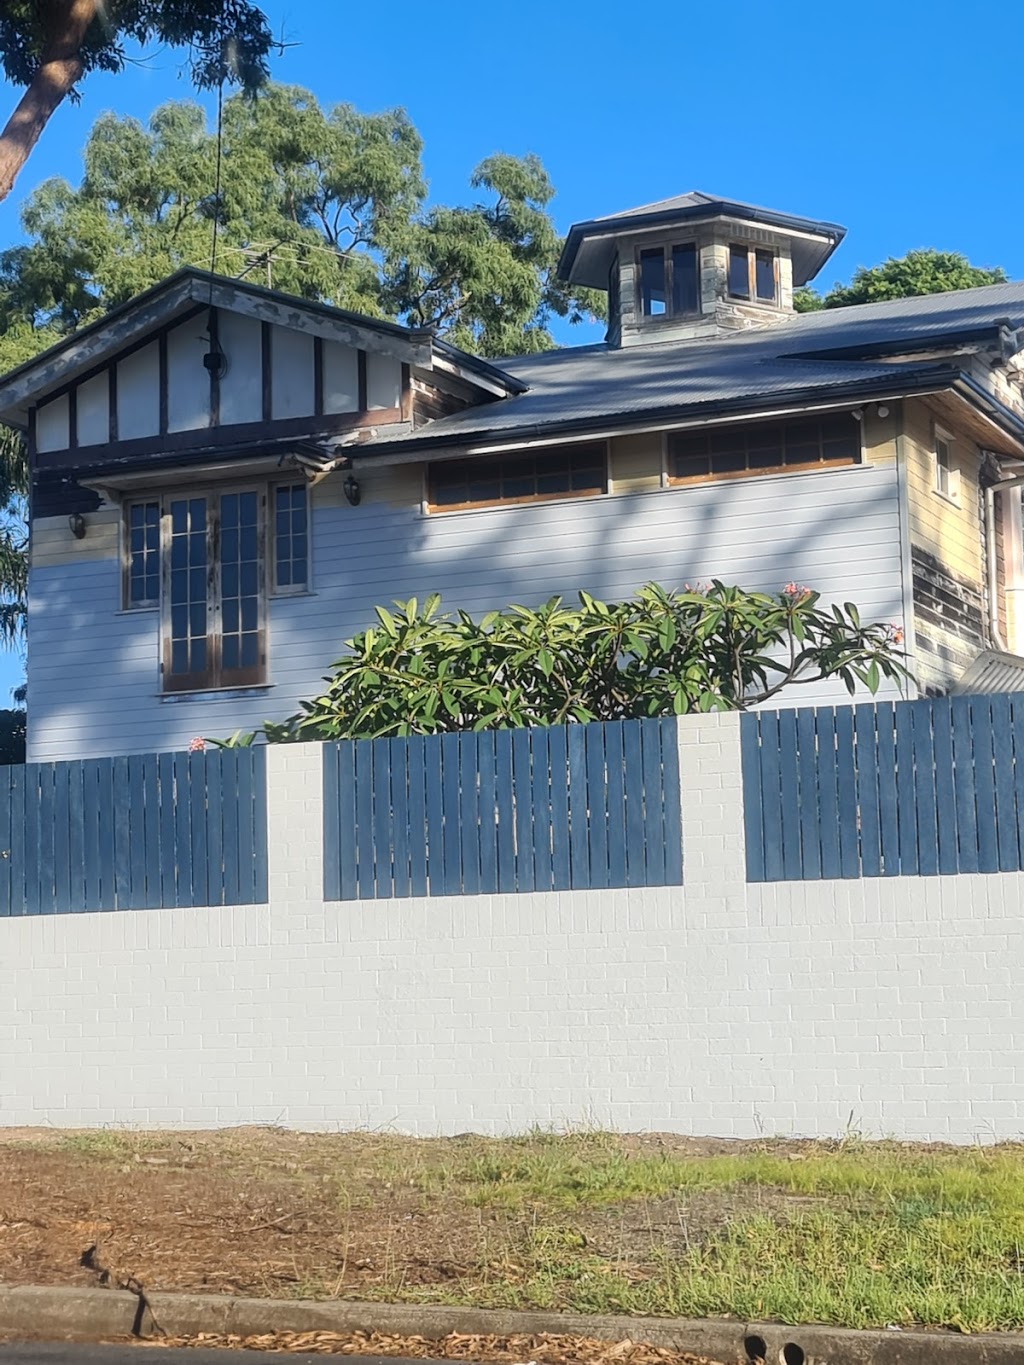 Nathan Alvers Painting Service |  | Baker St, Bray Park QLD 4500, Australia | 0449044090 OR +61 449 044 090